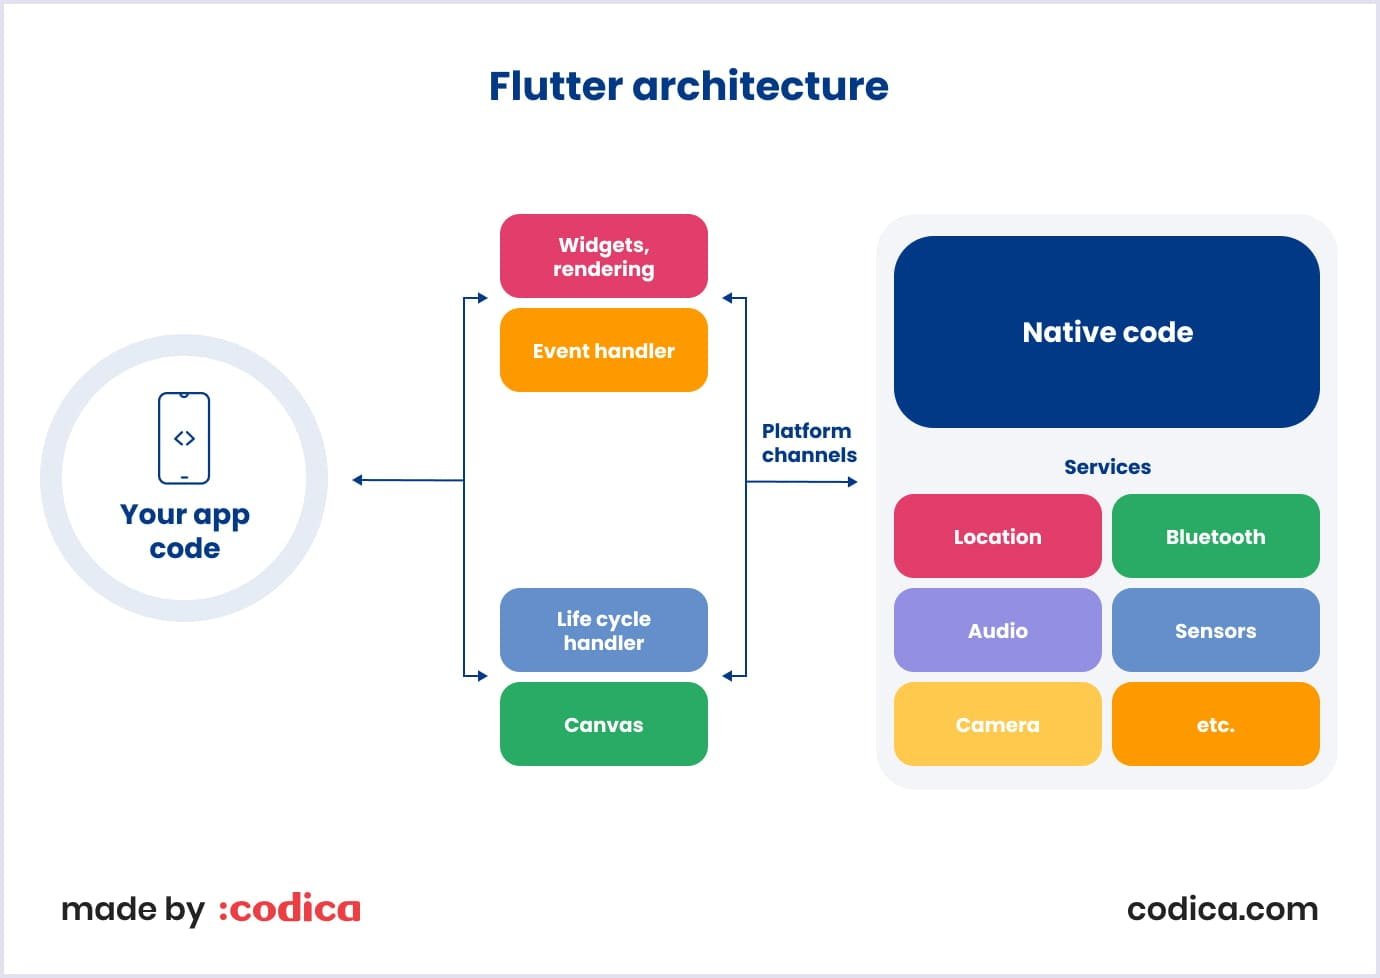 Basic overview of FLutter architecture